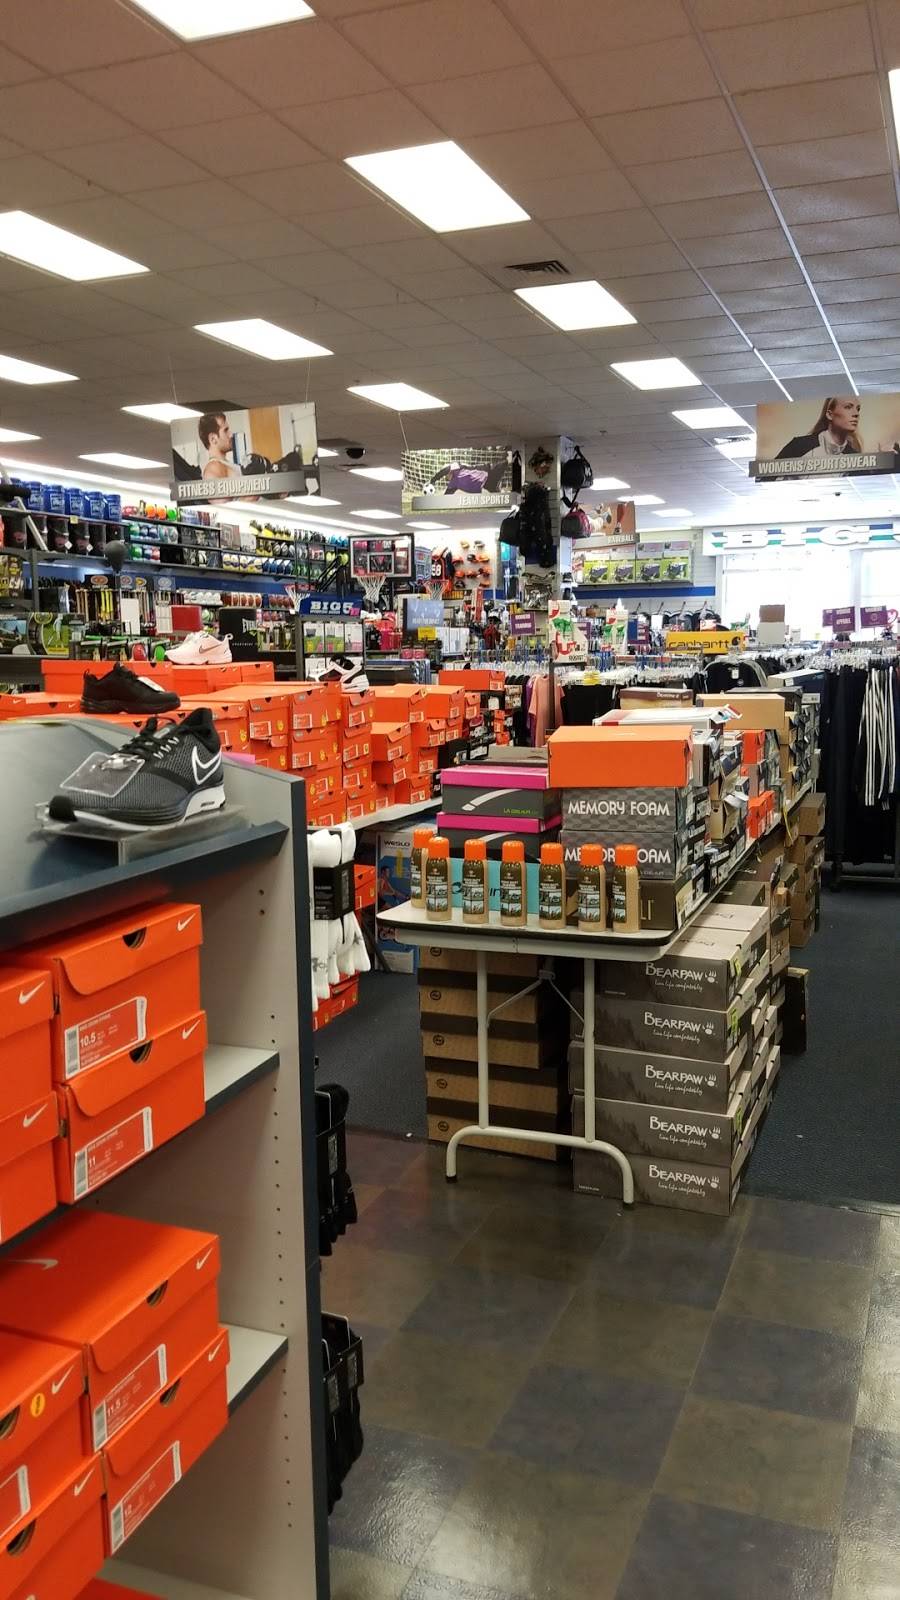 Big 5 Sporting Goods | 1401 E 120th Ave, Thornton, CO 80233 | Phone: (303) 453-0700